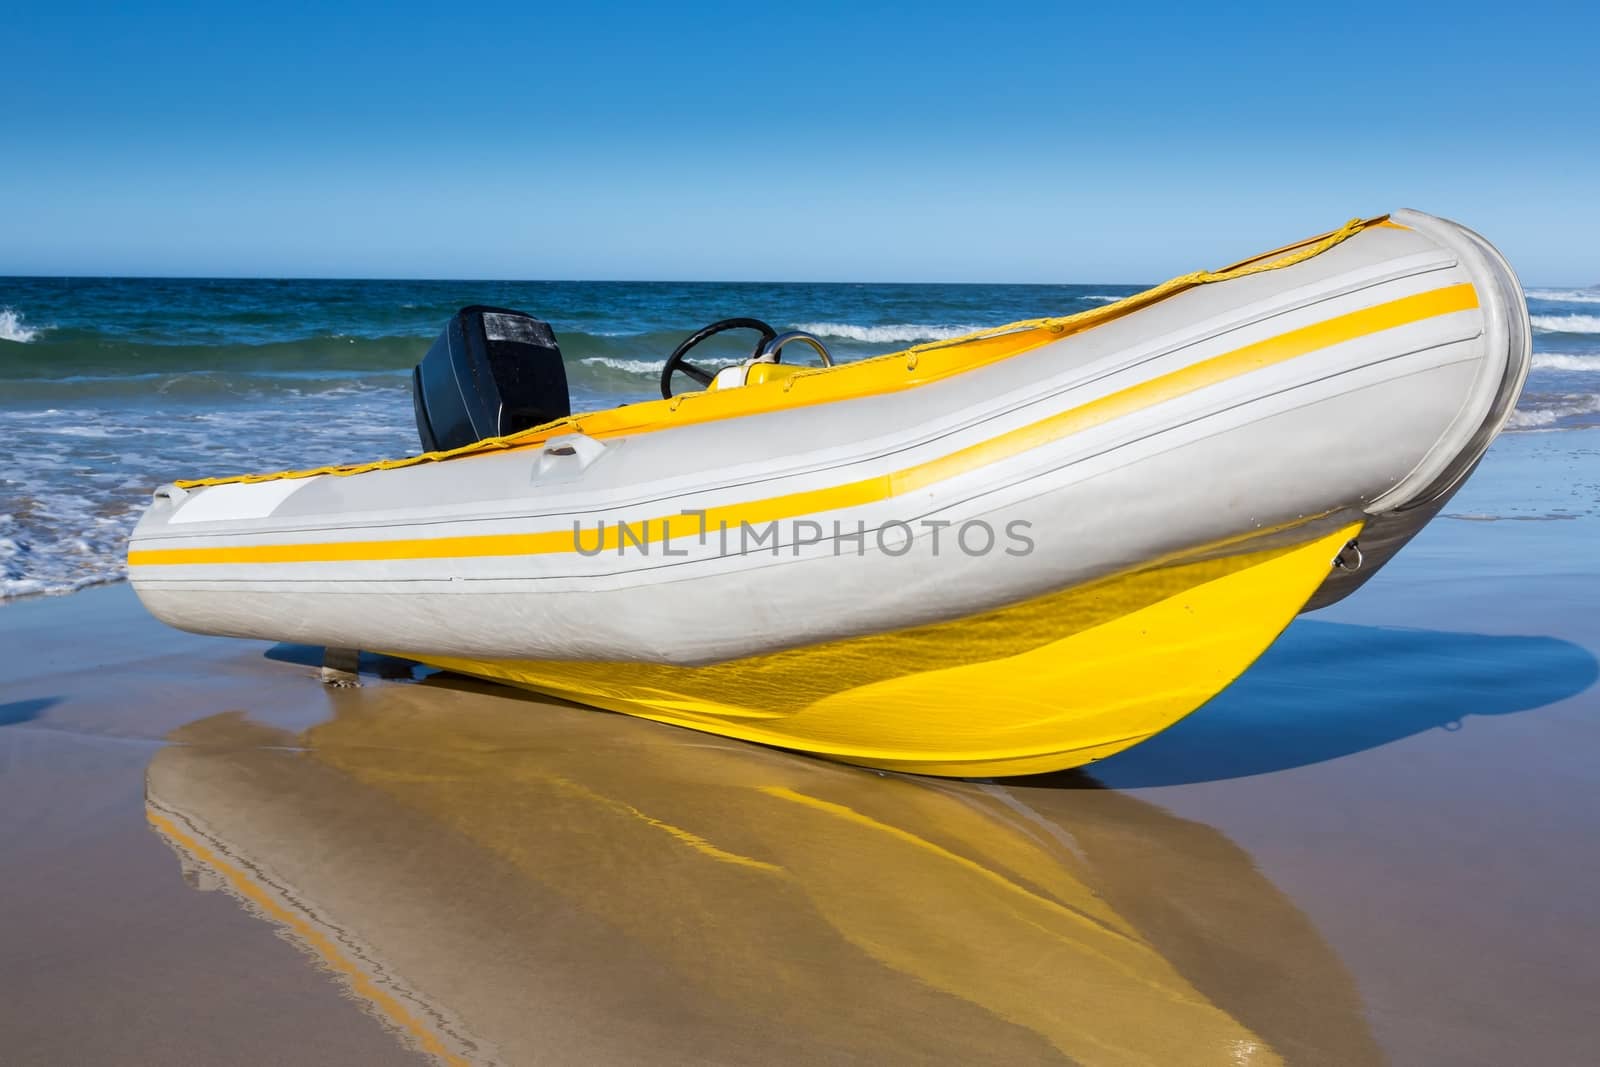 Yellow and white rubber duck inflatable boat on the sandy beach